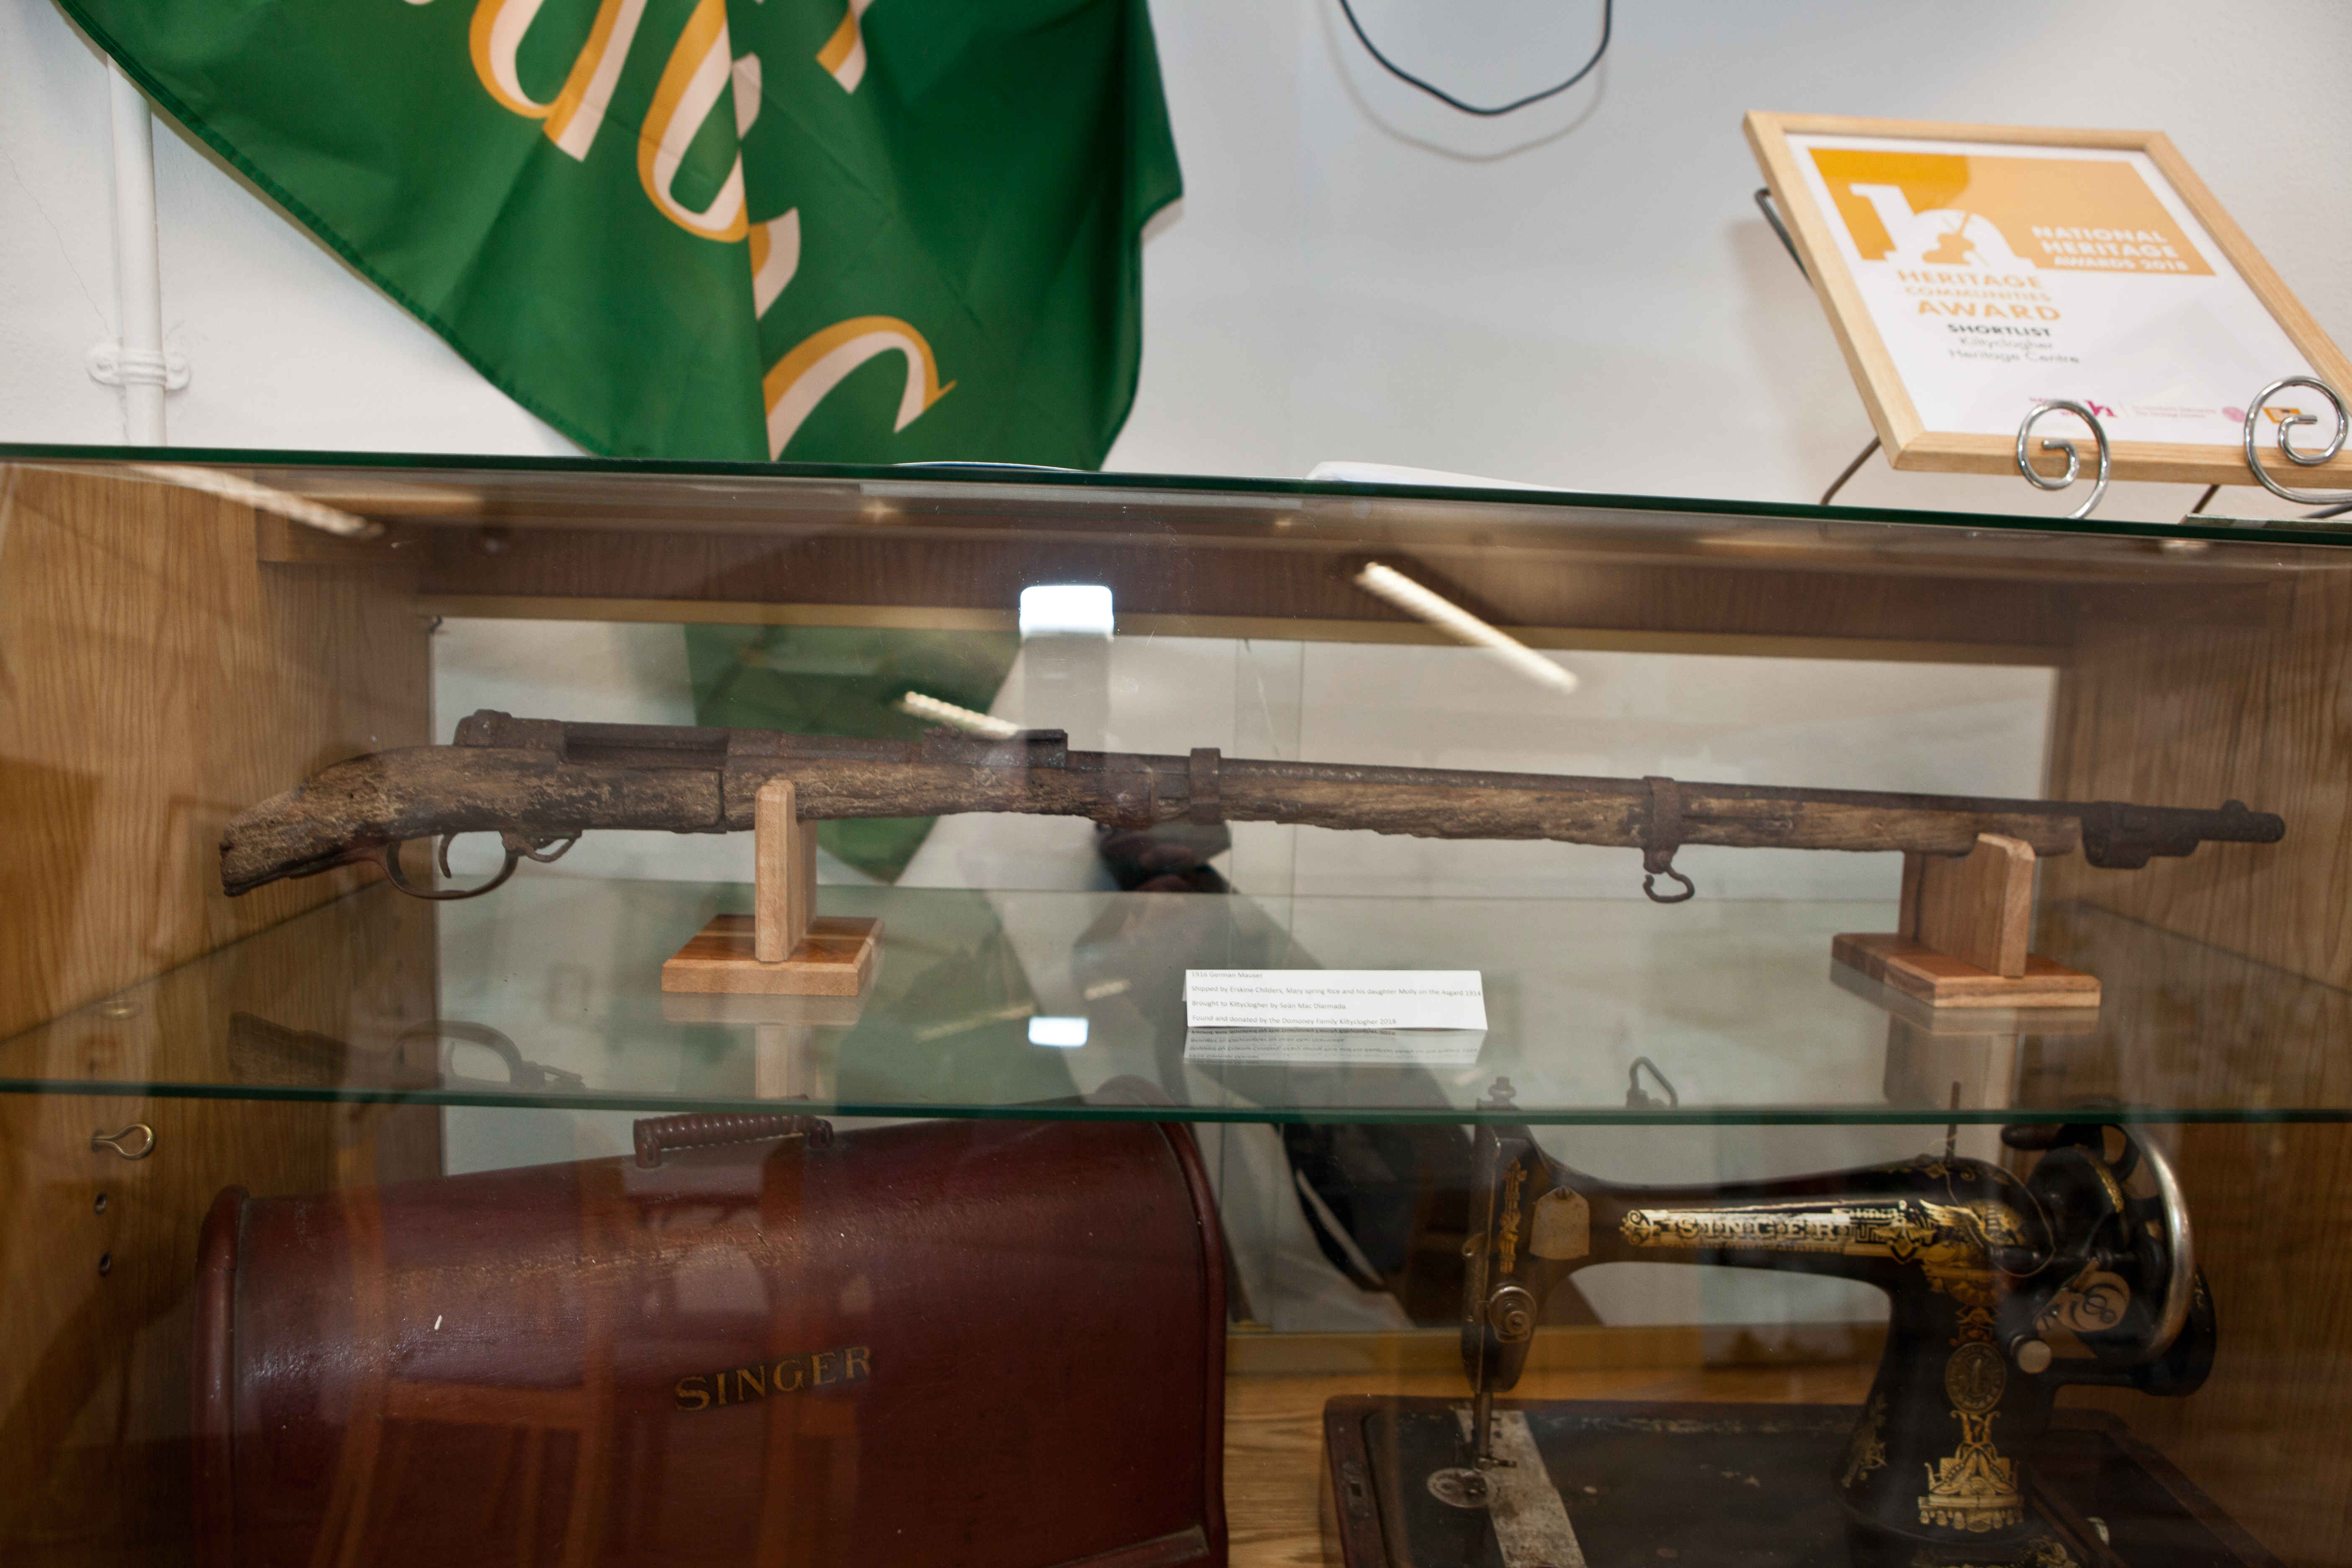 Items on display in Heritage Centre